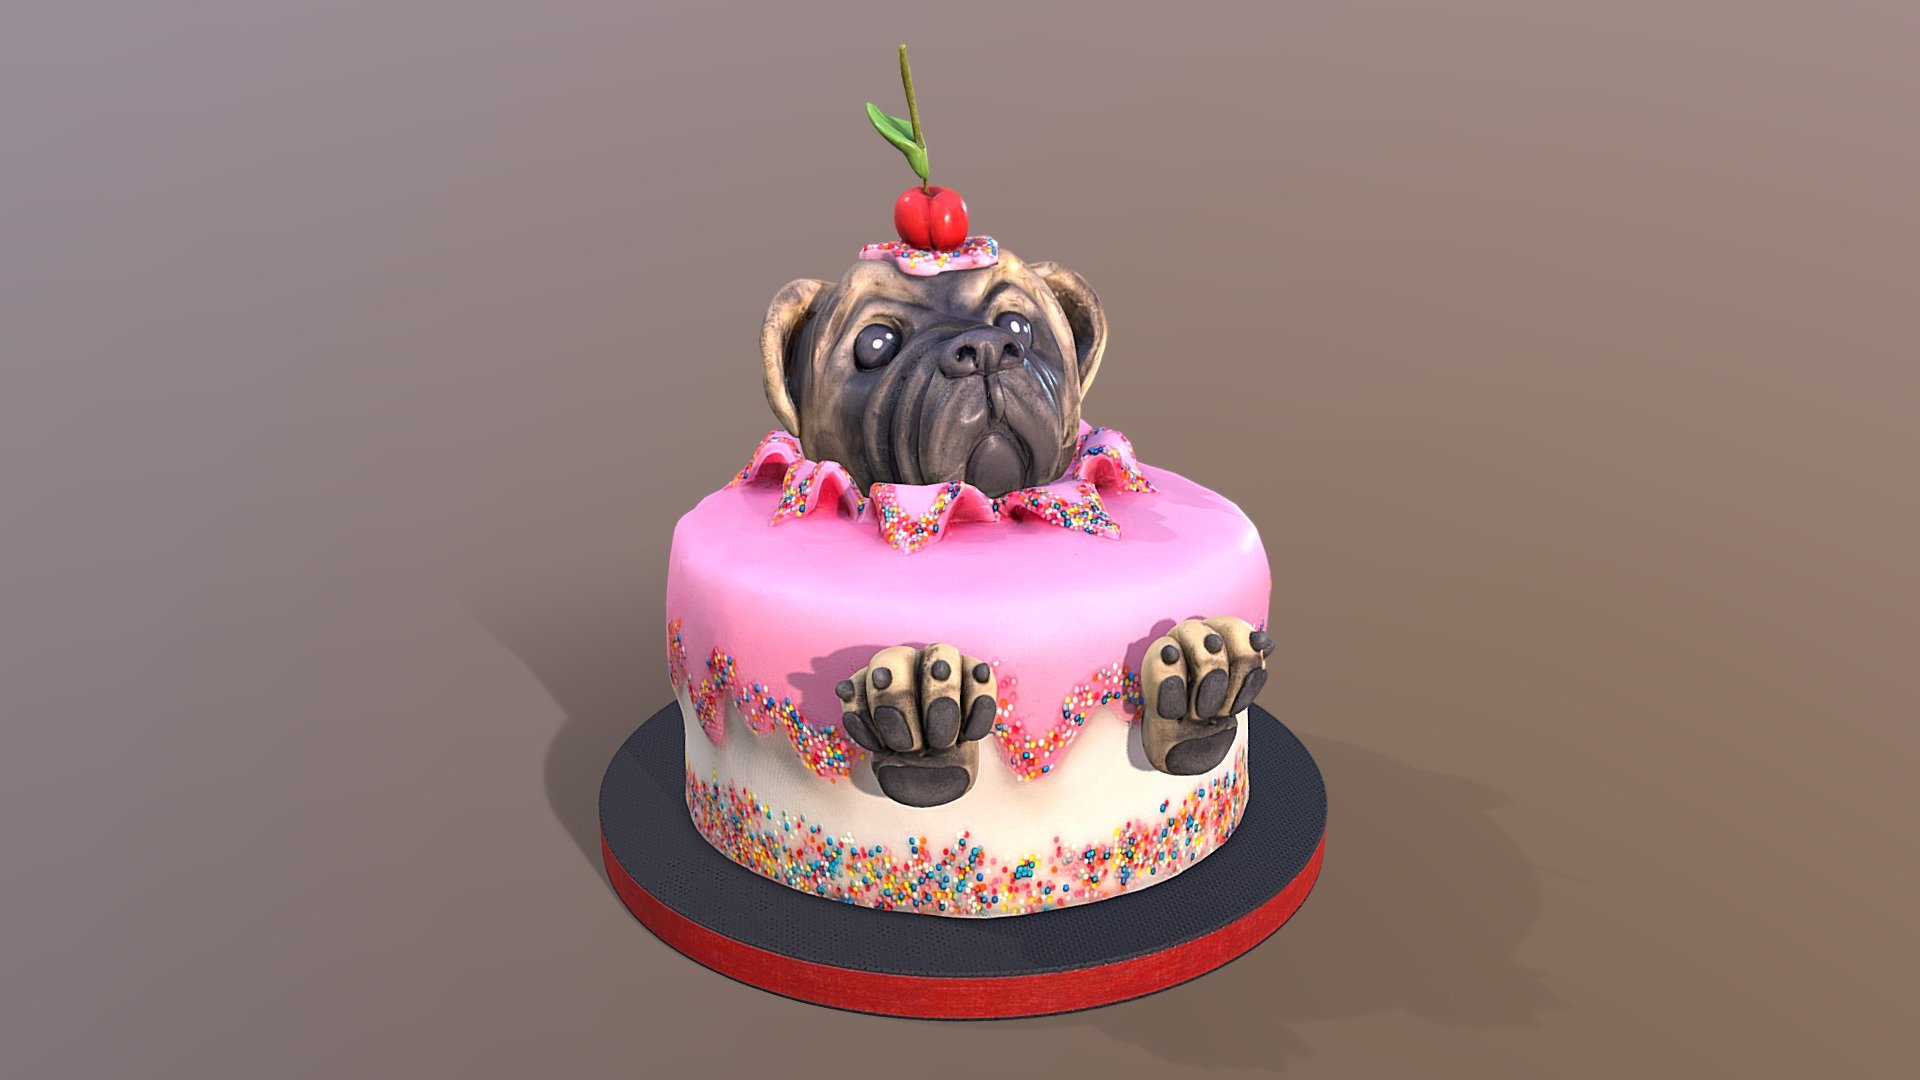 Pug In a Box Cake - Buy Online, Free Next Day Delivery — New Cakes